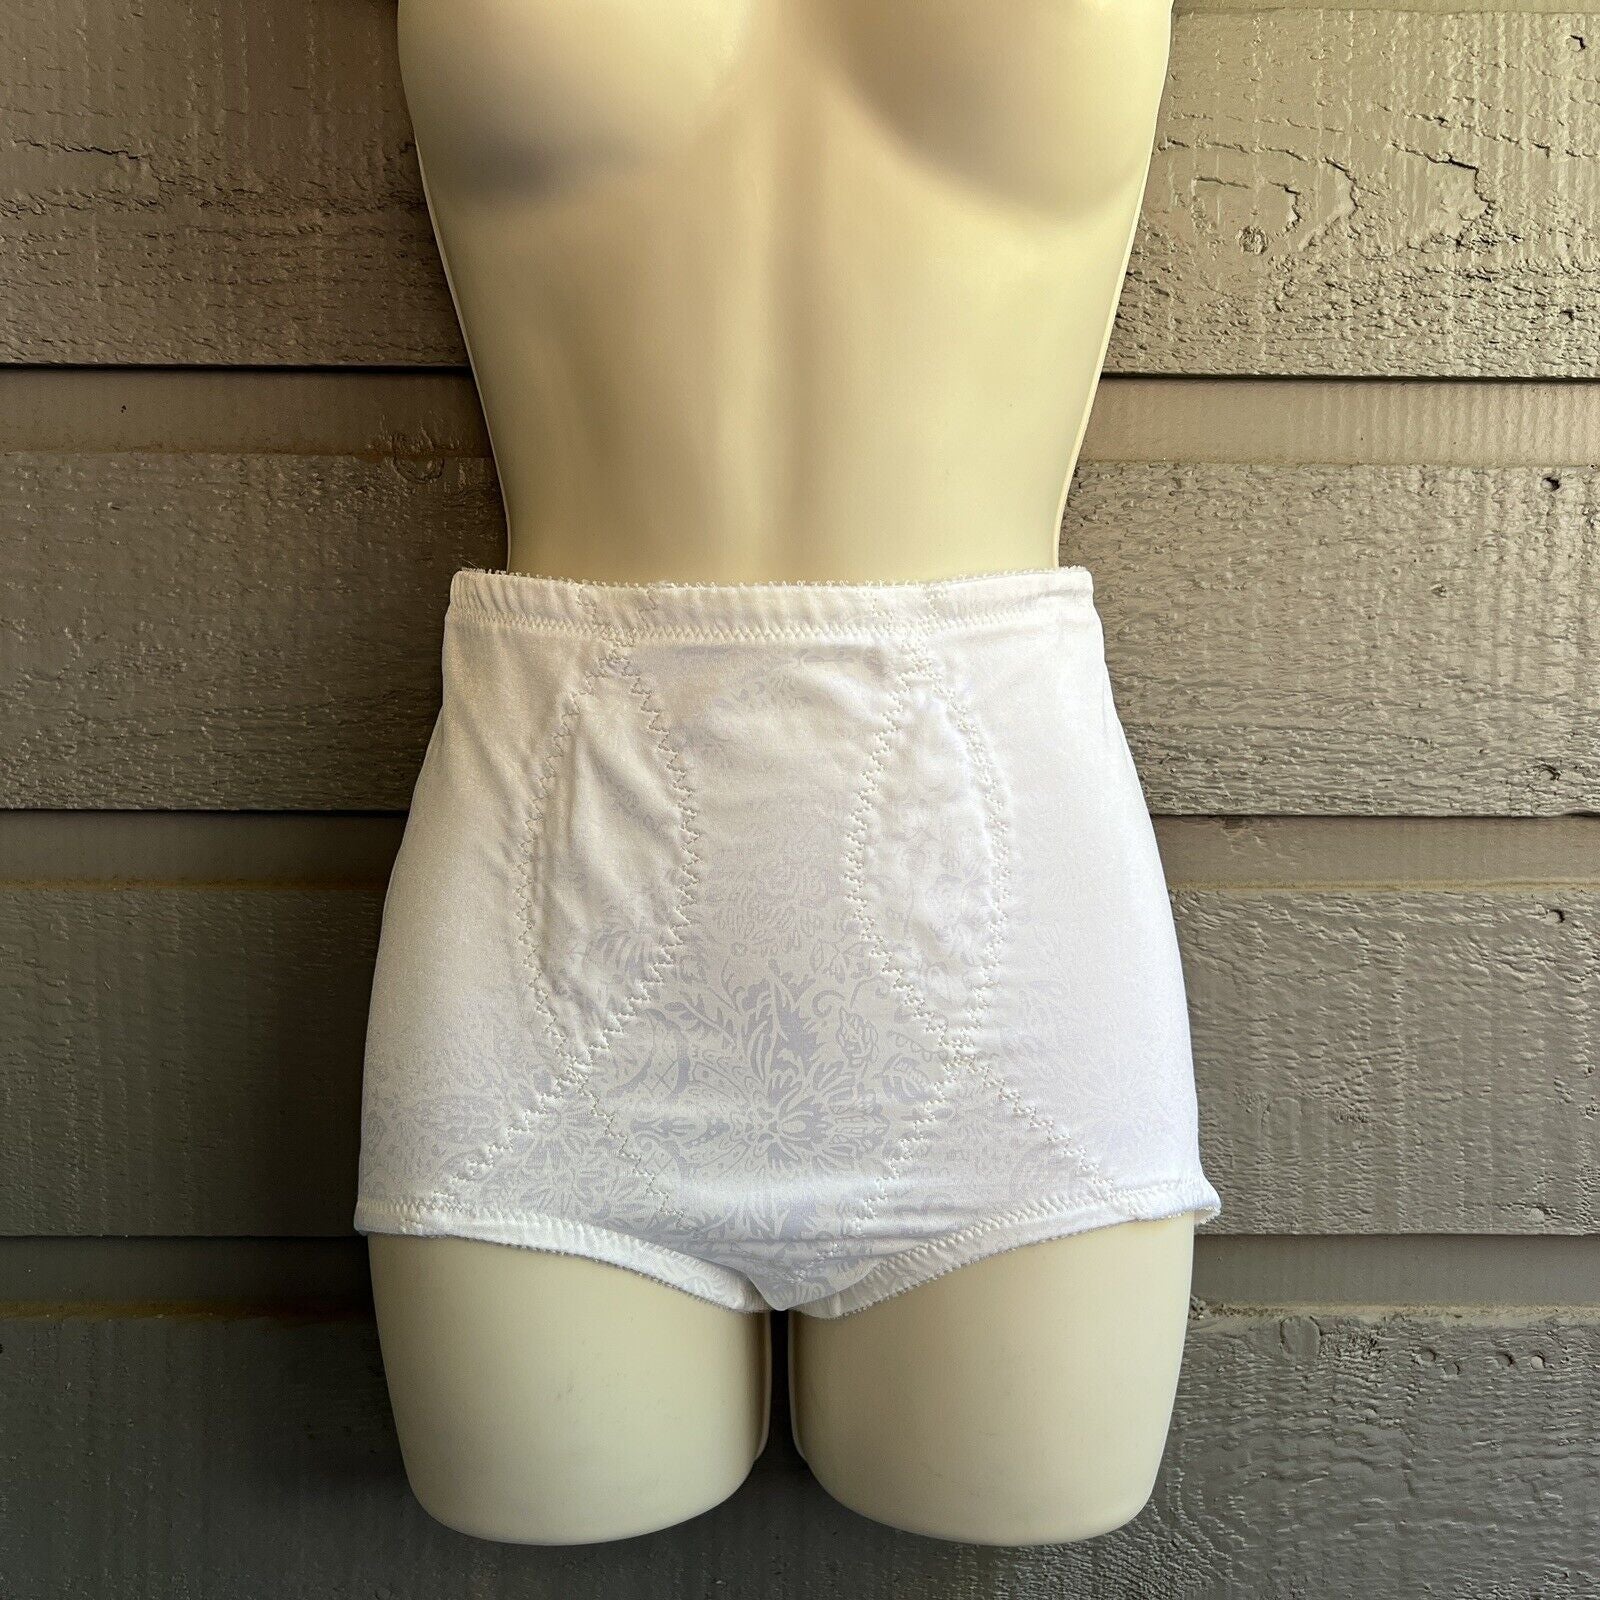 70s Large White Lace Shape Wear Sissy Panties Vintage Lingerie By Unde